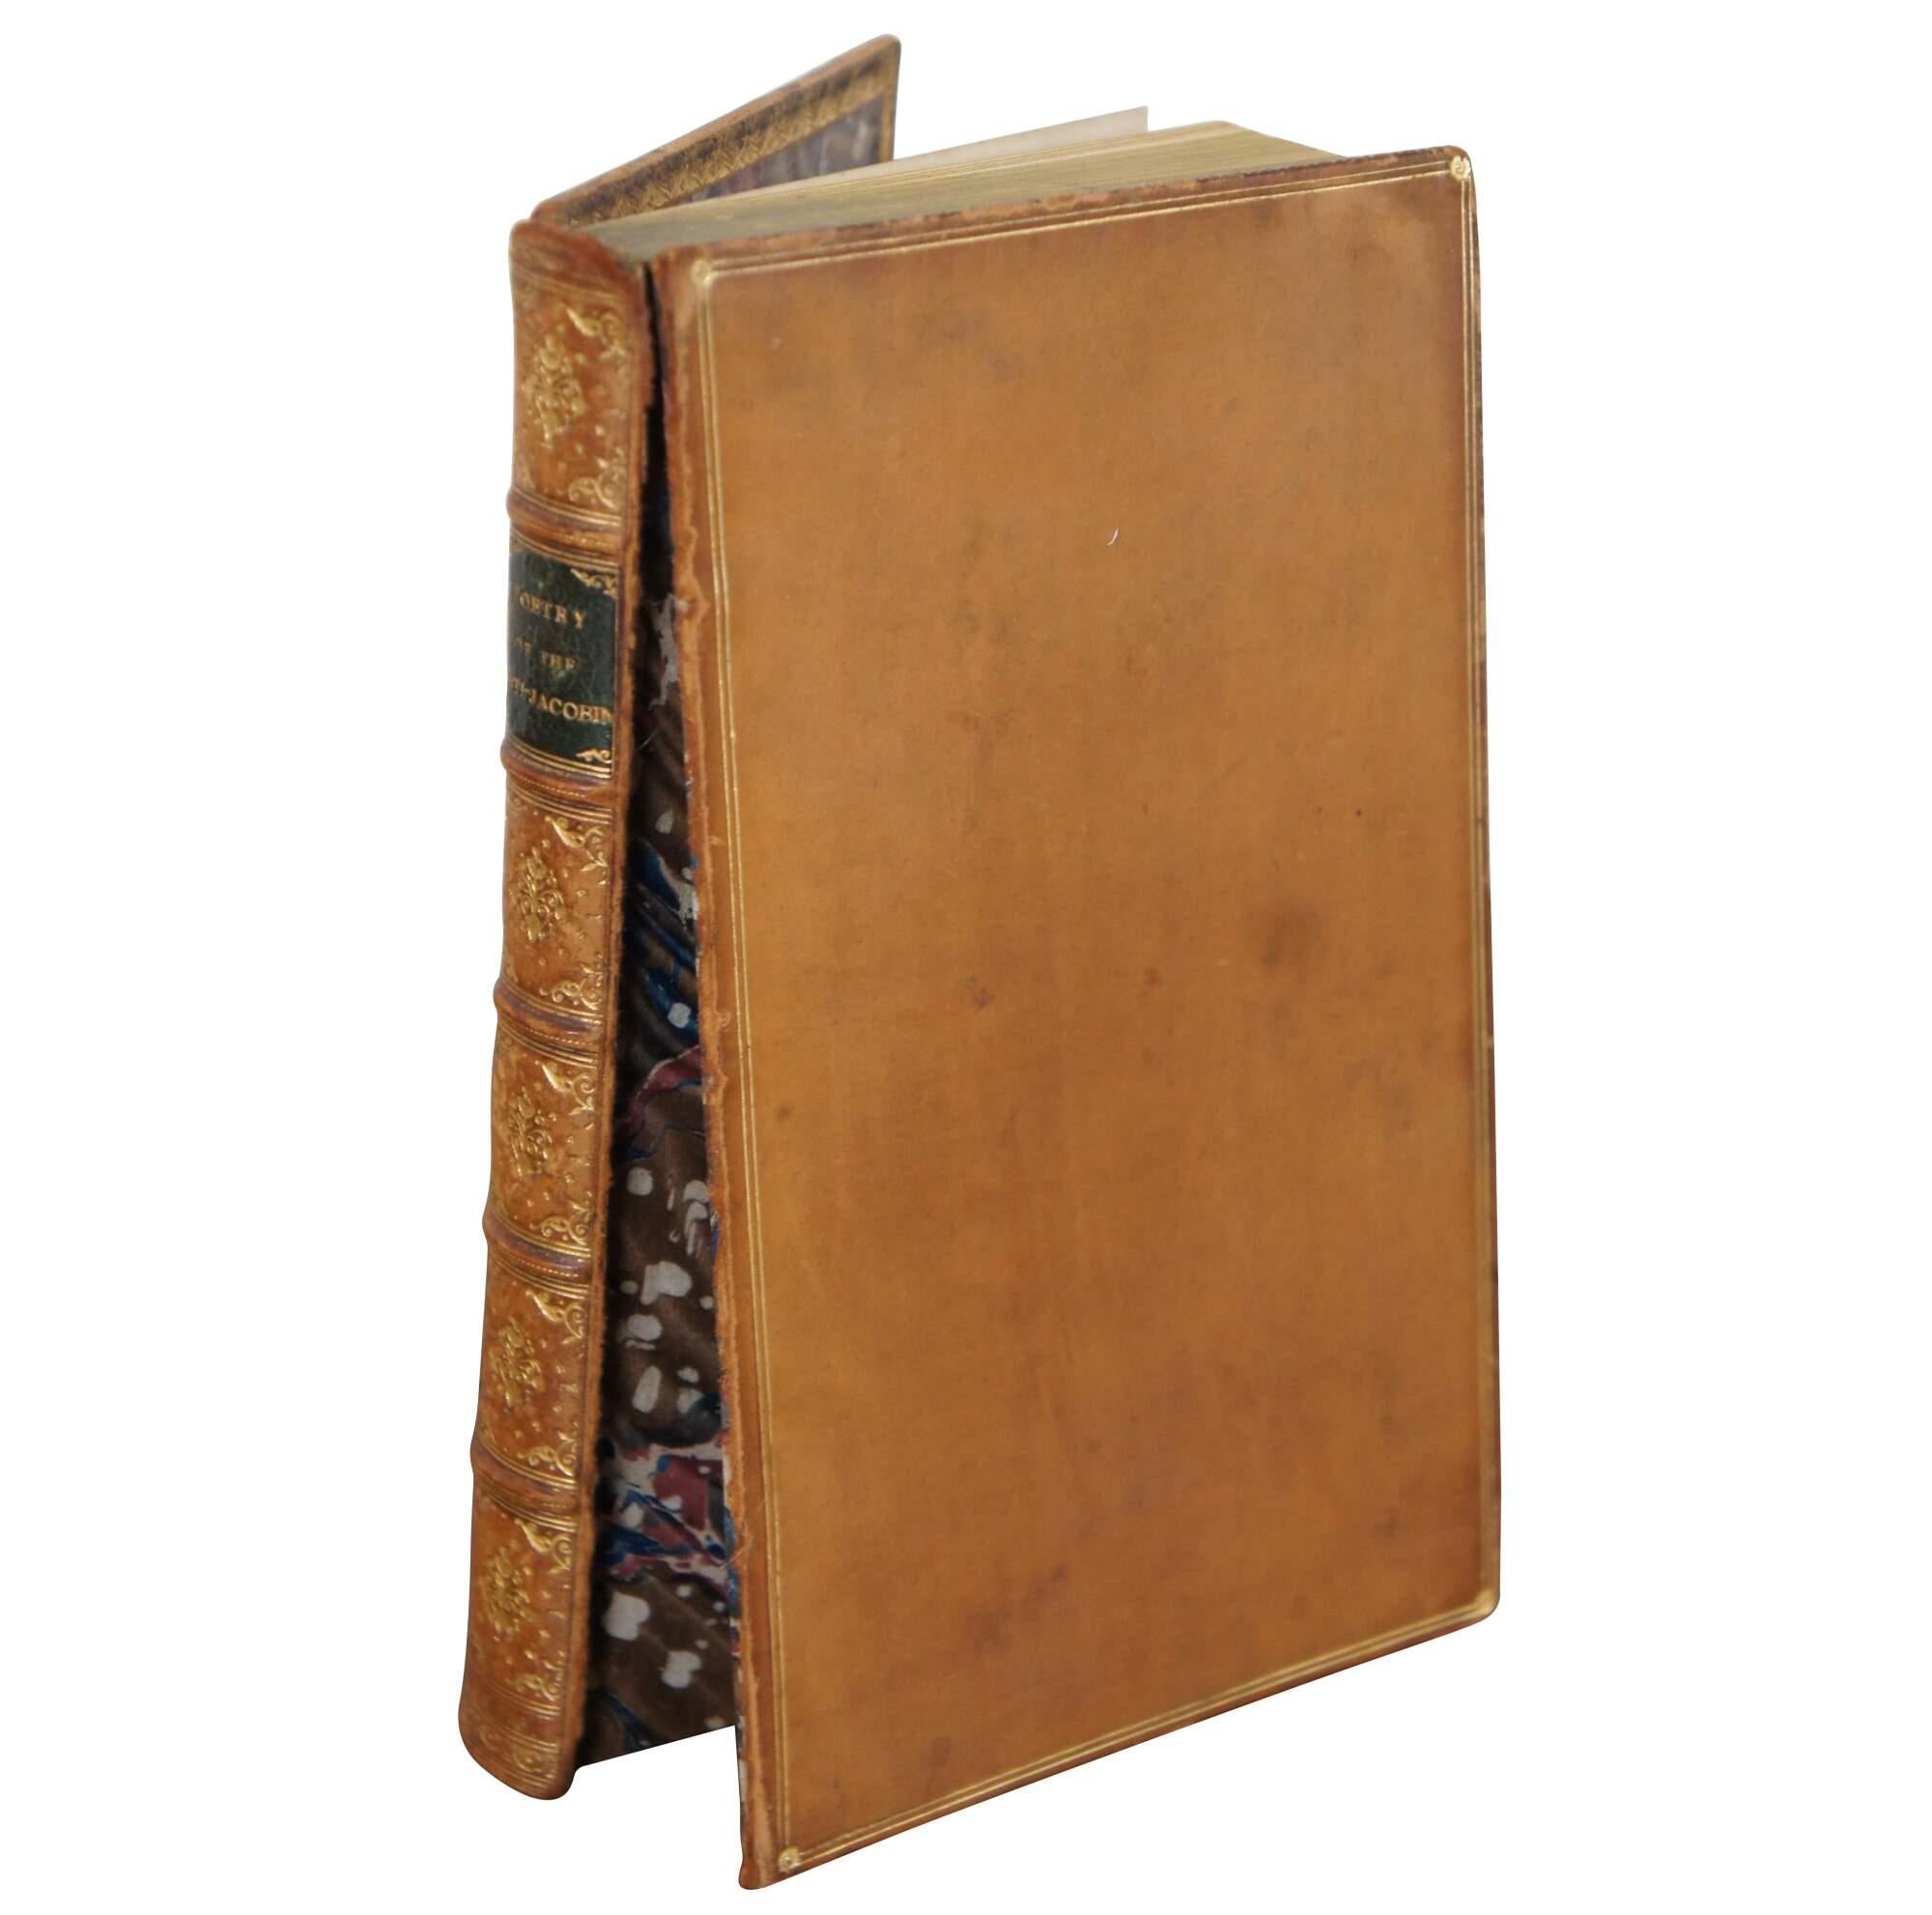 Antique Regency era brown leather bound hard cover book titled “Poetry of the Anti-Jacobin” by a variety of anonymous authors – The Sixth Edition – printed by Ibotson and Palmer, London - published by Longman, Rees, Orme, Brown, and Green; John